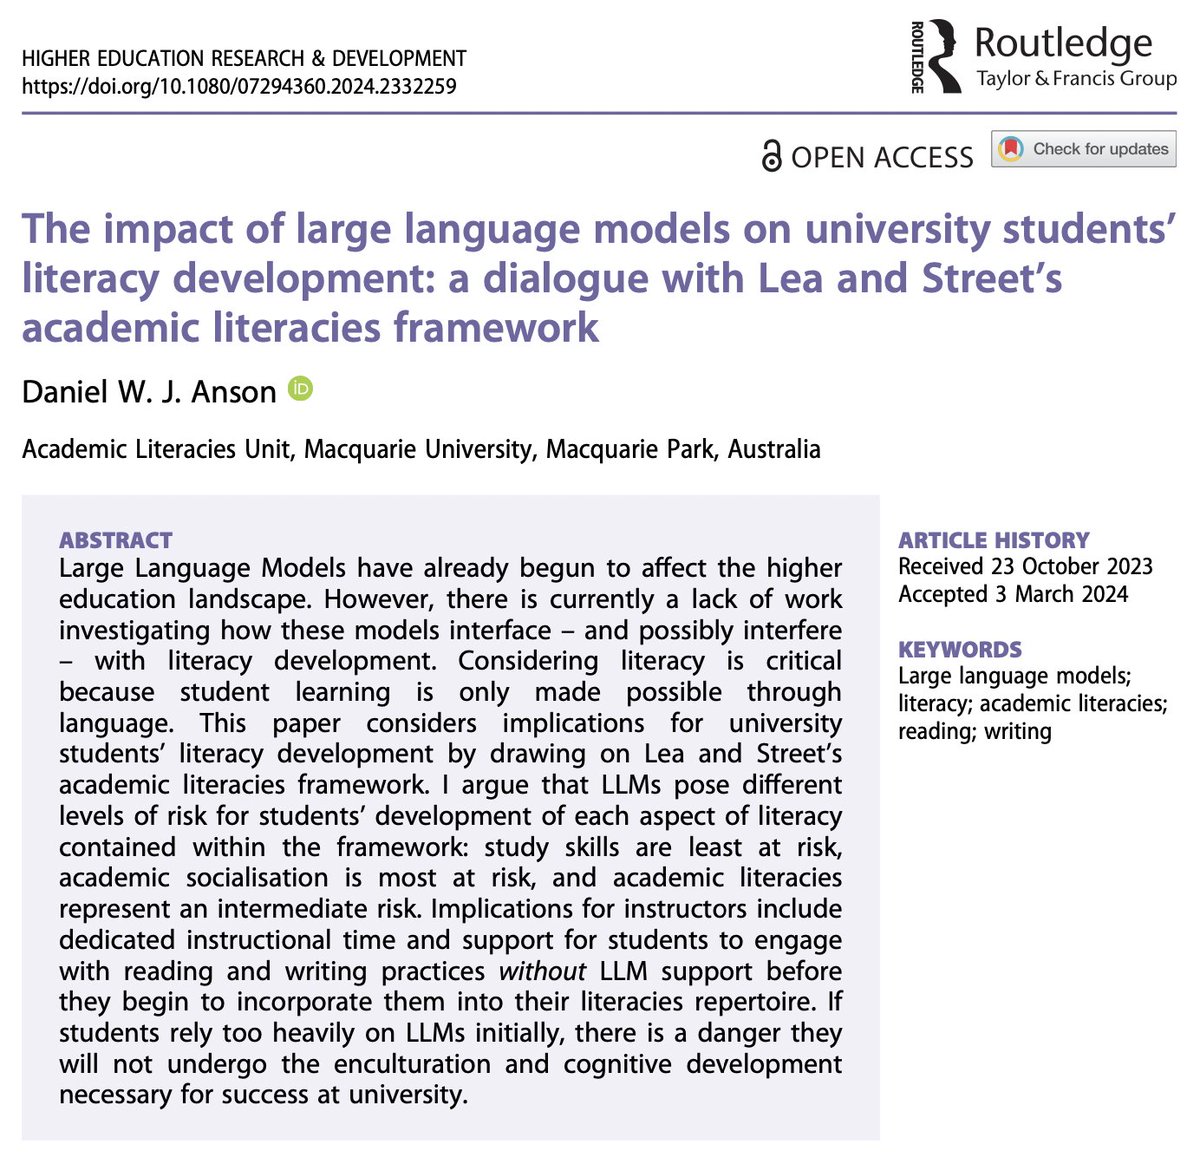 The impact of large language models on university students’ literacy development: a dialogue with Lea & Street’s academic literacies framework

Daniel WJ Anson

🔓→ doi.org/10.1080/072943…

#HigherEd #AcademicLiteracies #LLMs #AI #AcrWri #LargeLanguagemodels #UniversityStudents